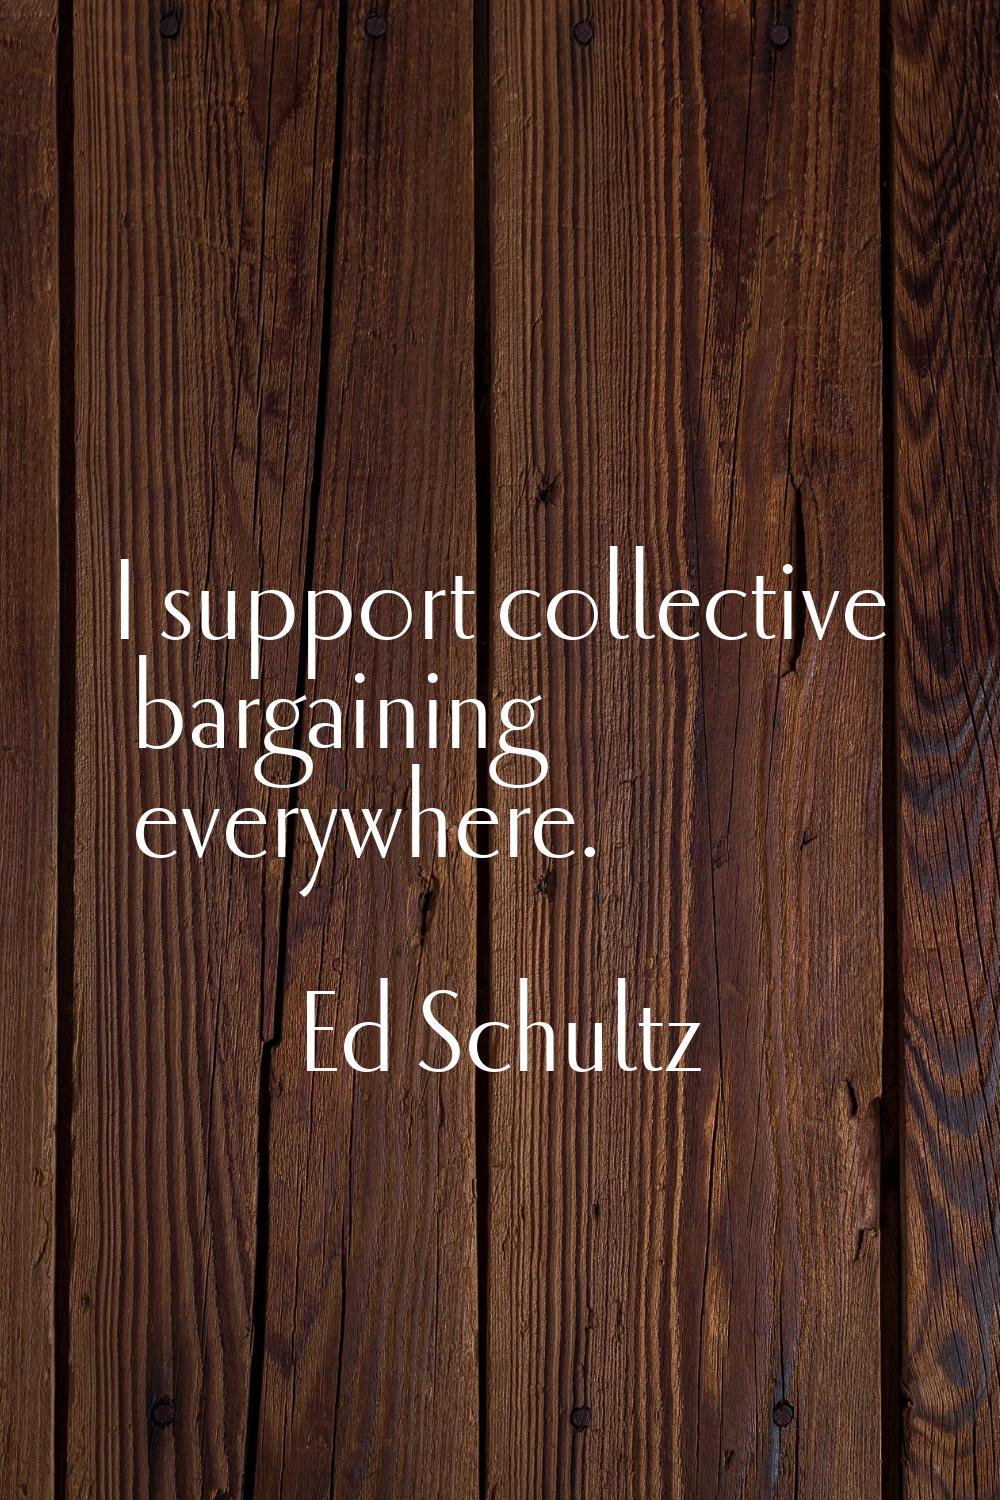 I support collective bargaining everywhere.